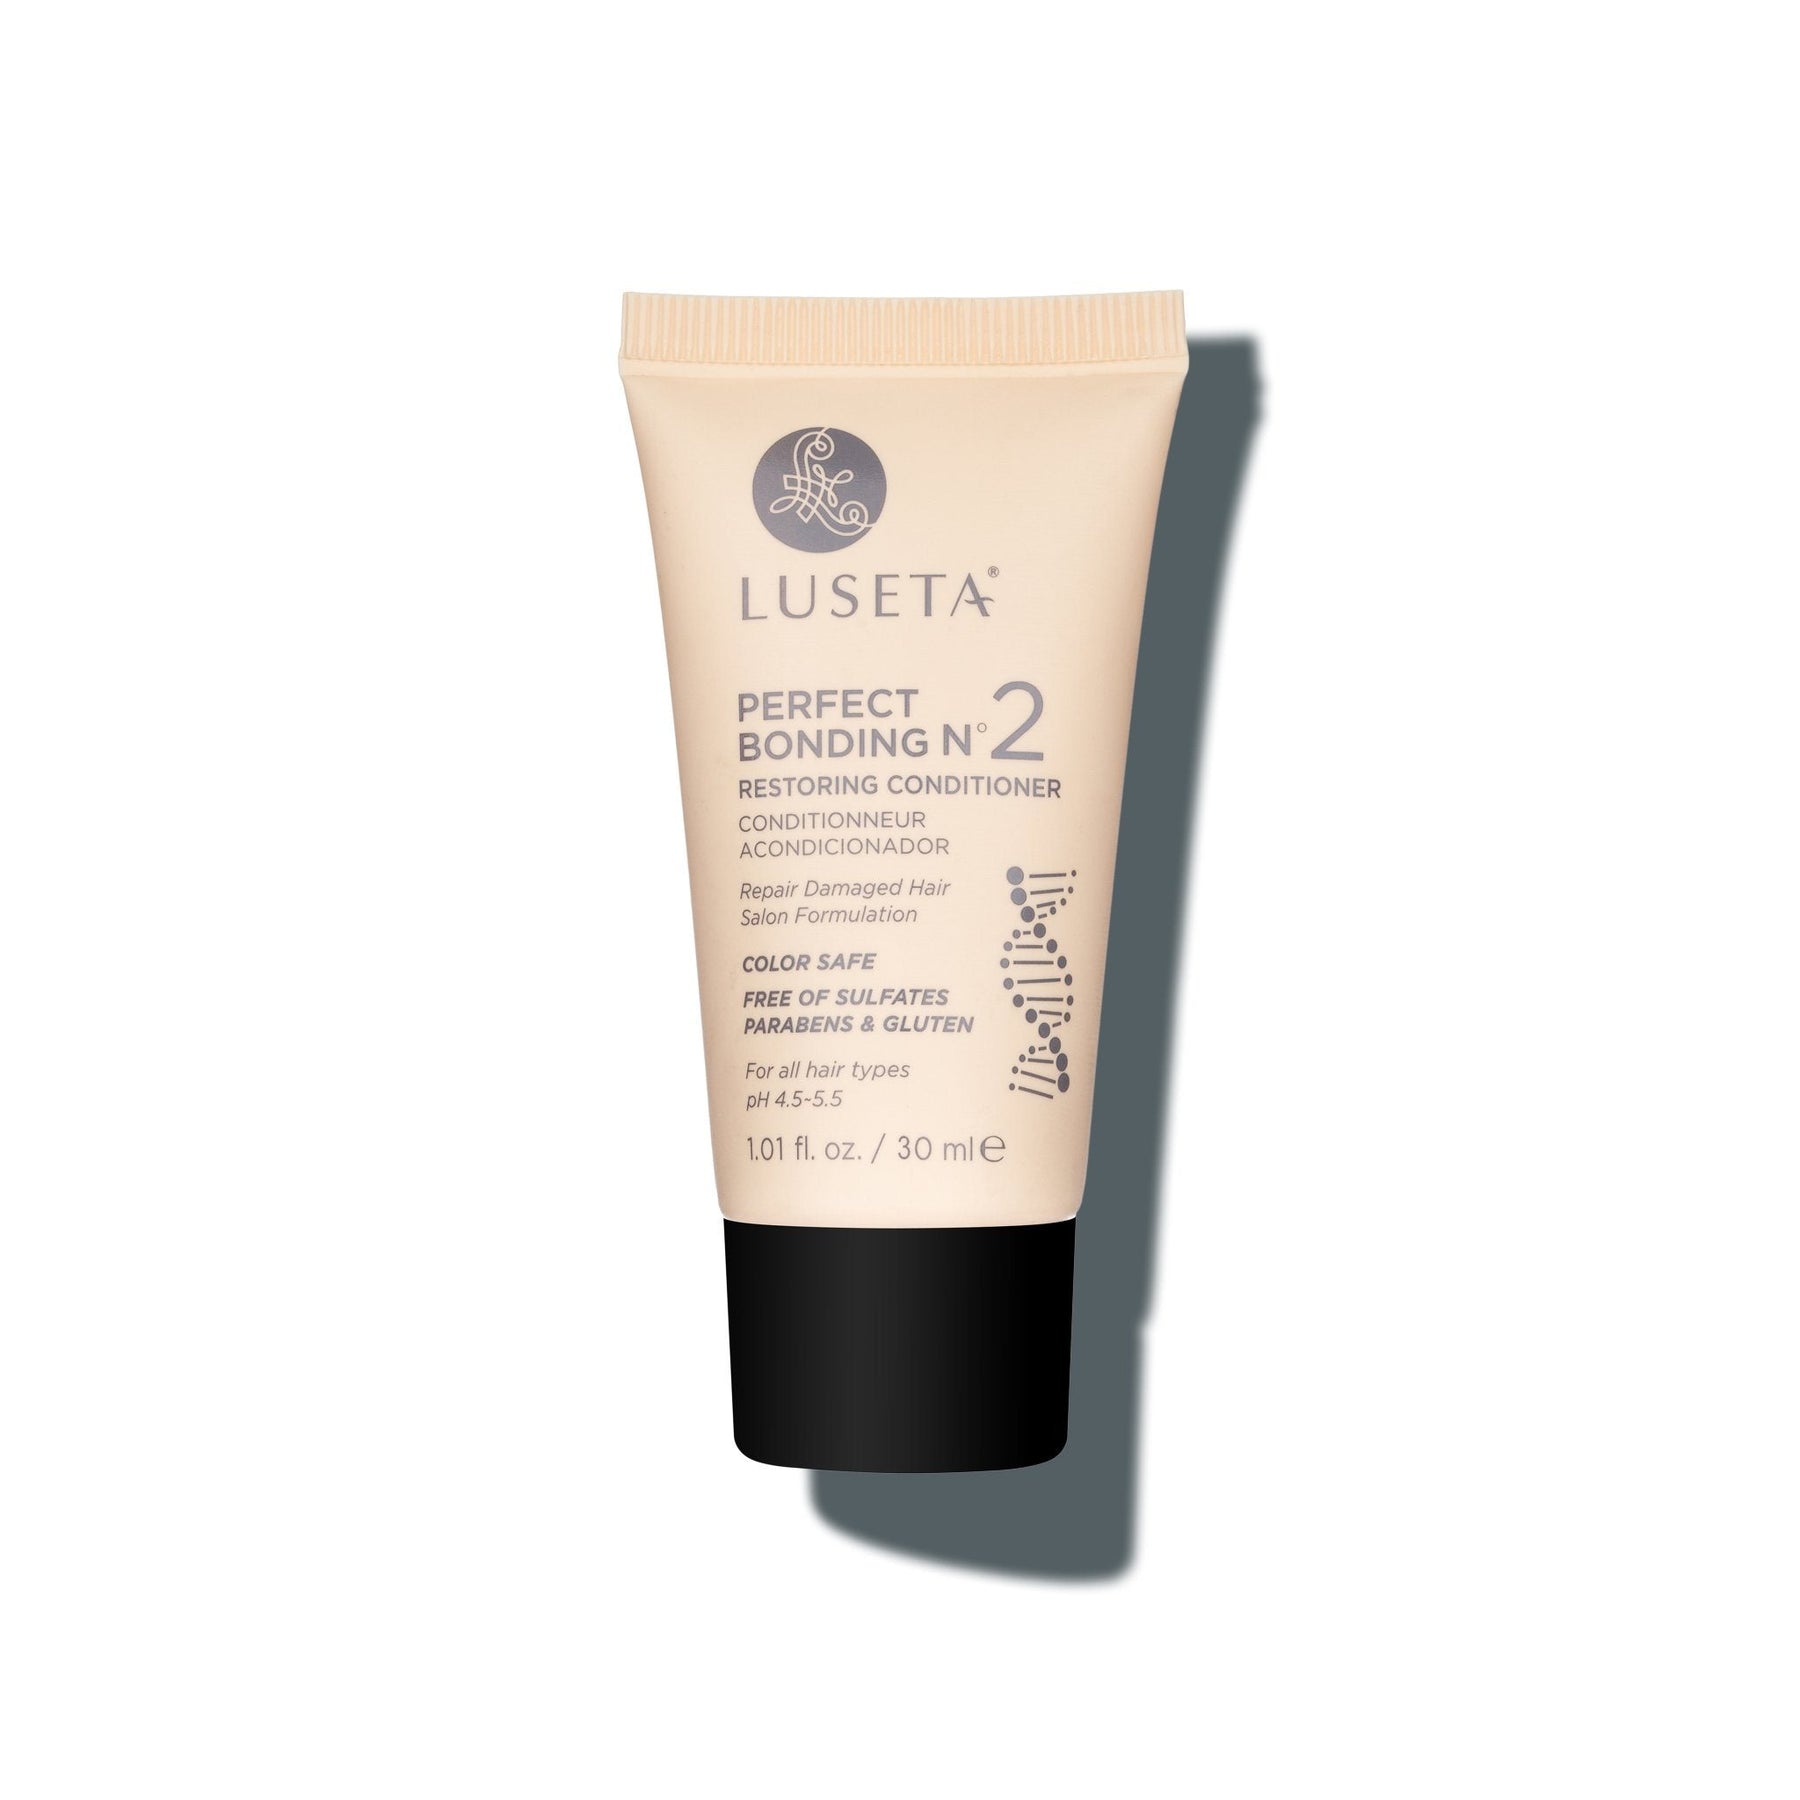 Perfect Bonding Restoring Conditioner - 1.01oz - by Luseta Beauty |ProCare Outlet|